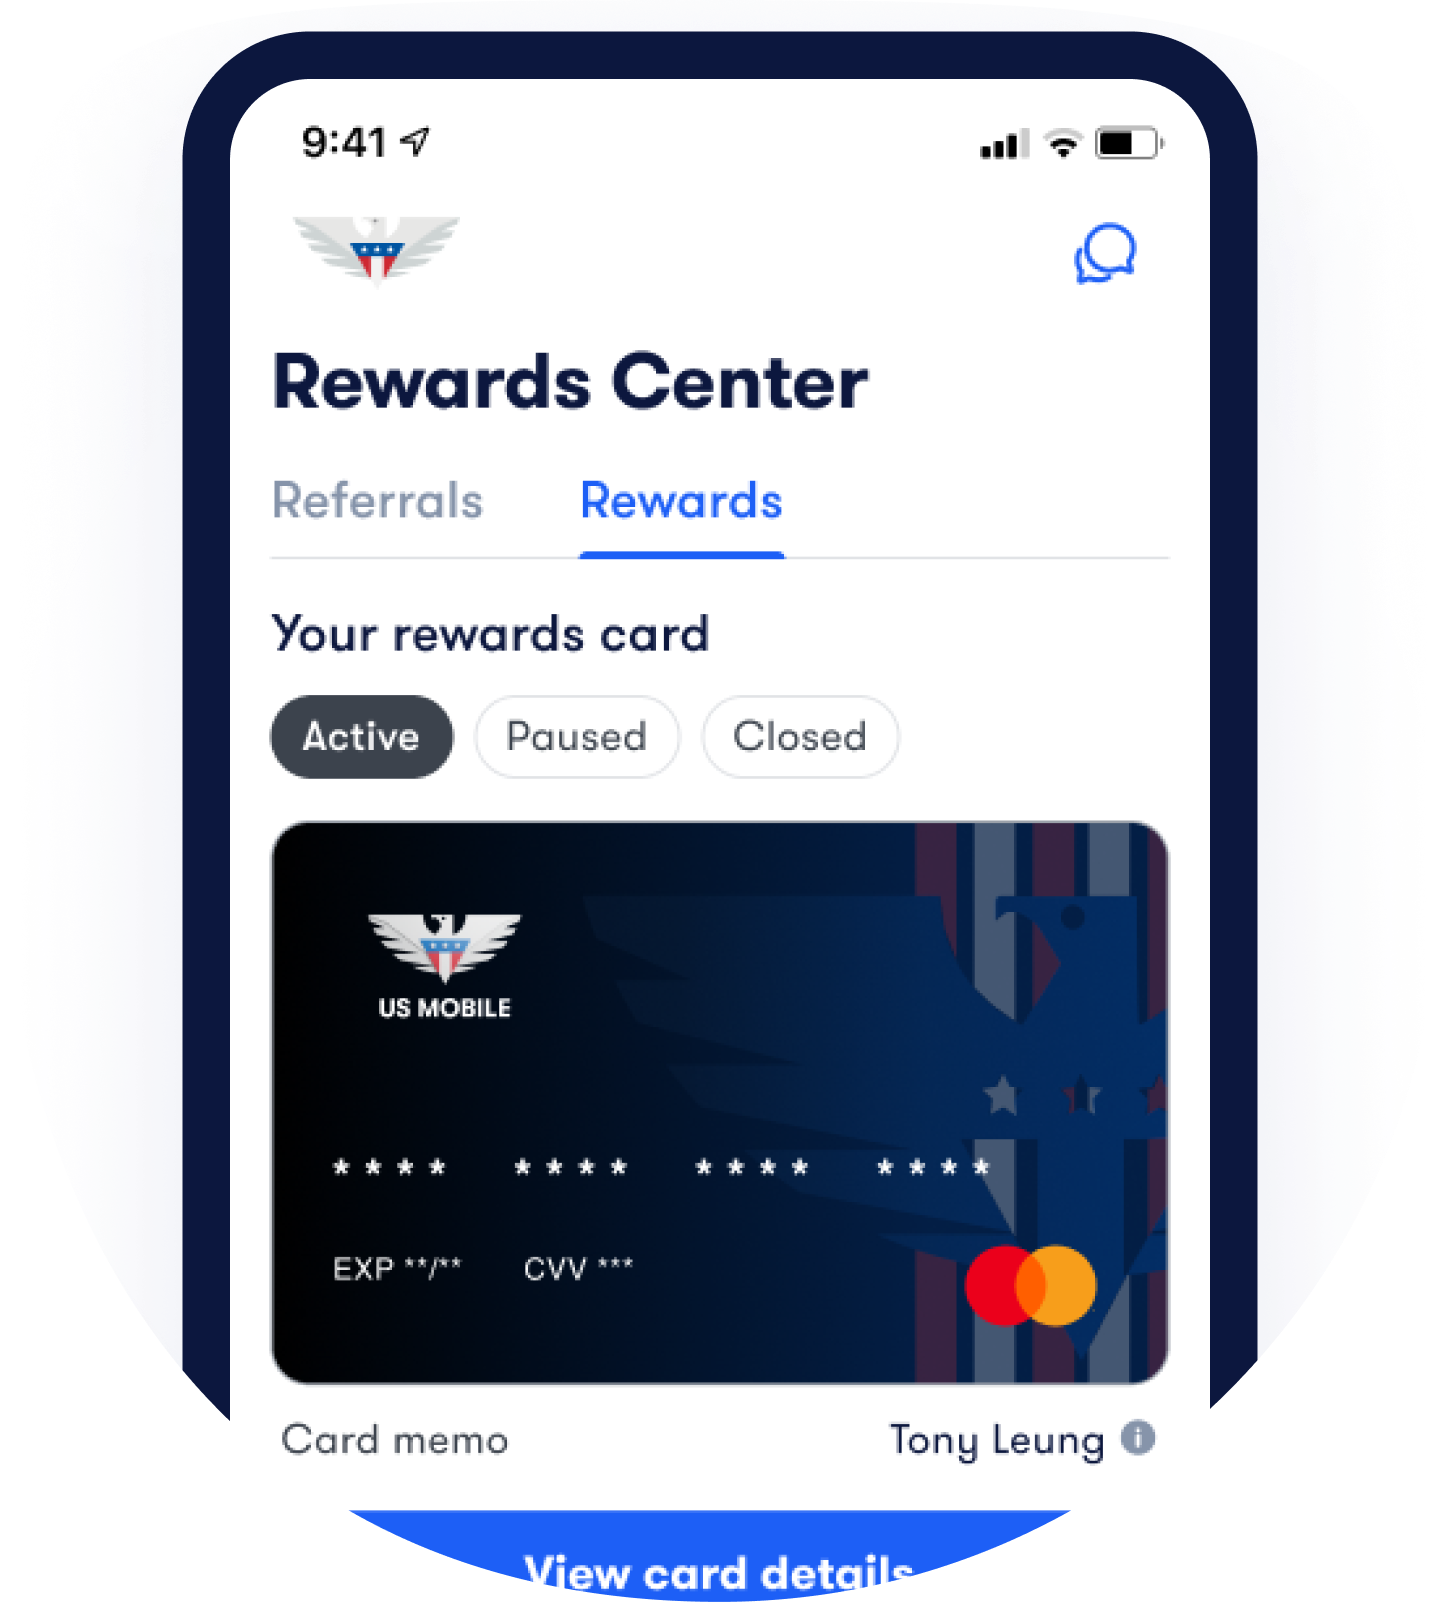 Image of the Rewards Center in the mobile app